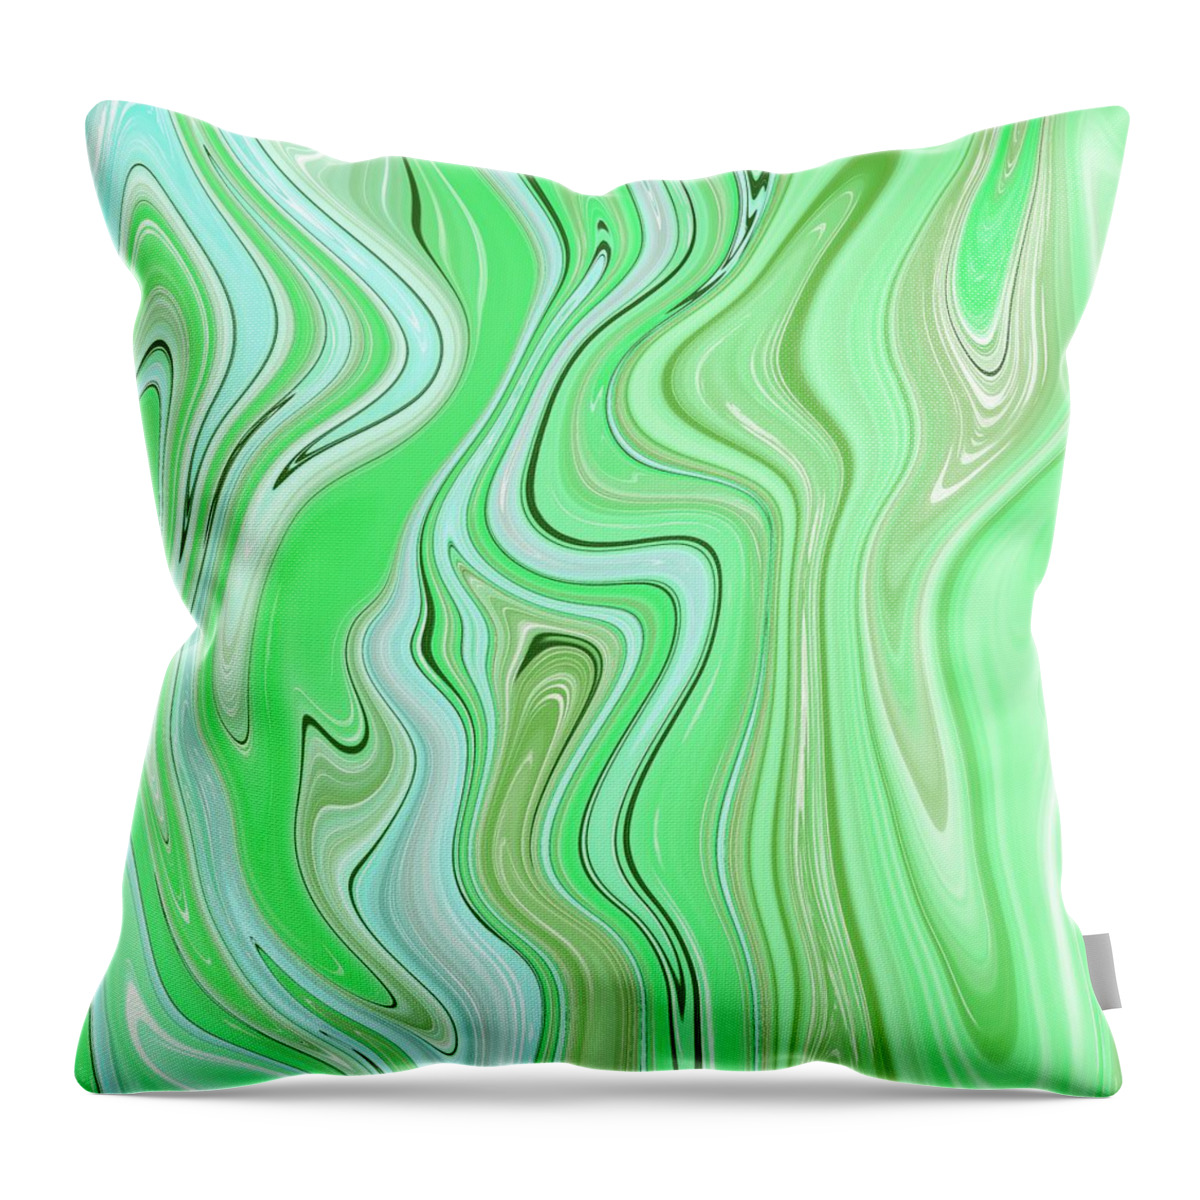 Fluid Painting Throw Pillow featuring the painting Fluid Painting Wave Pattern Green by Patricia Piotrak